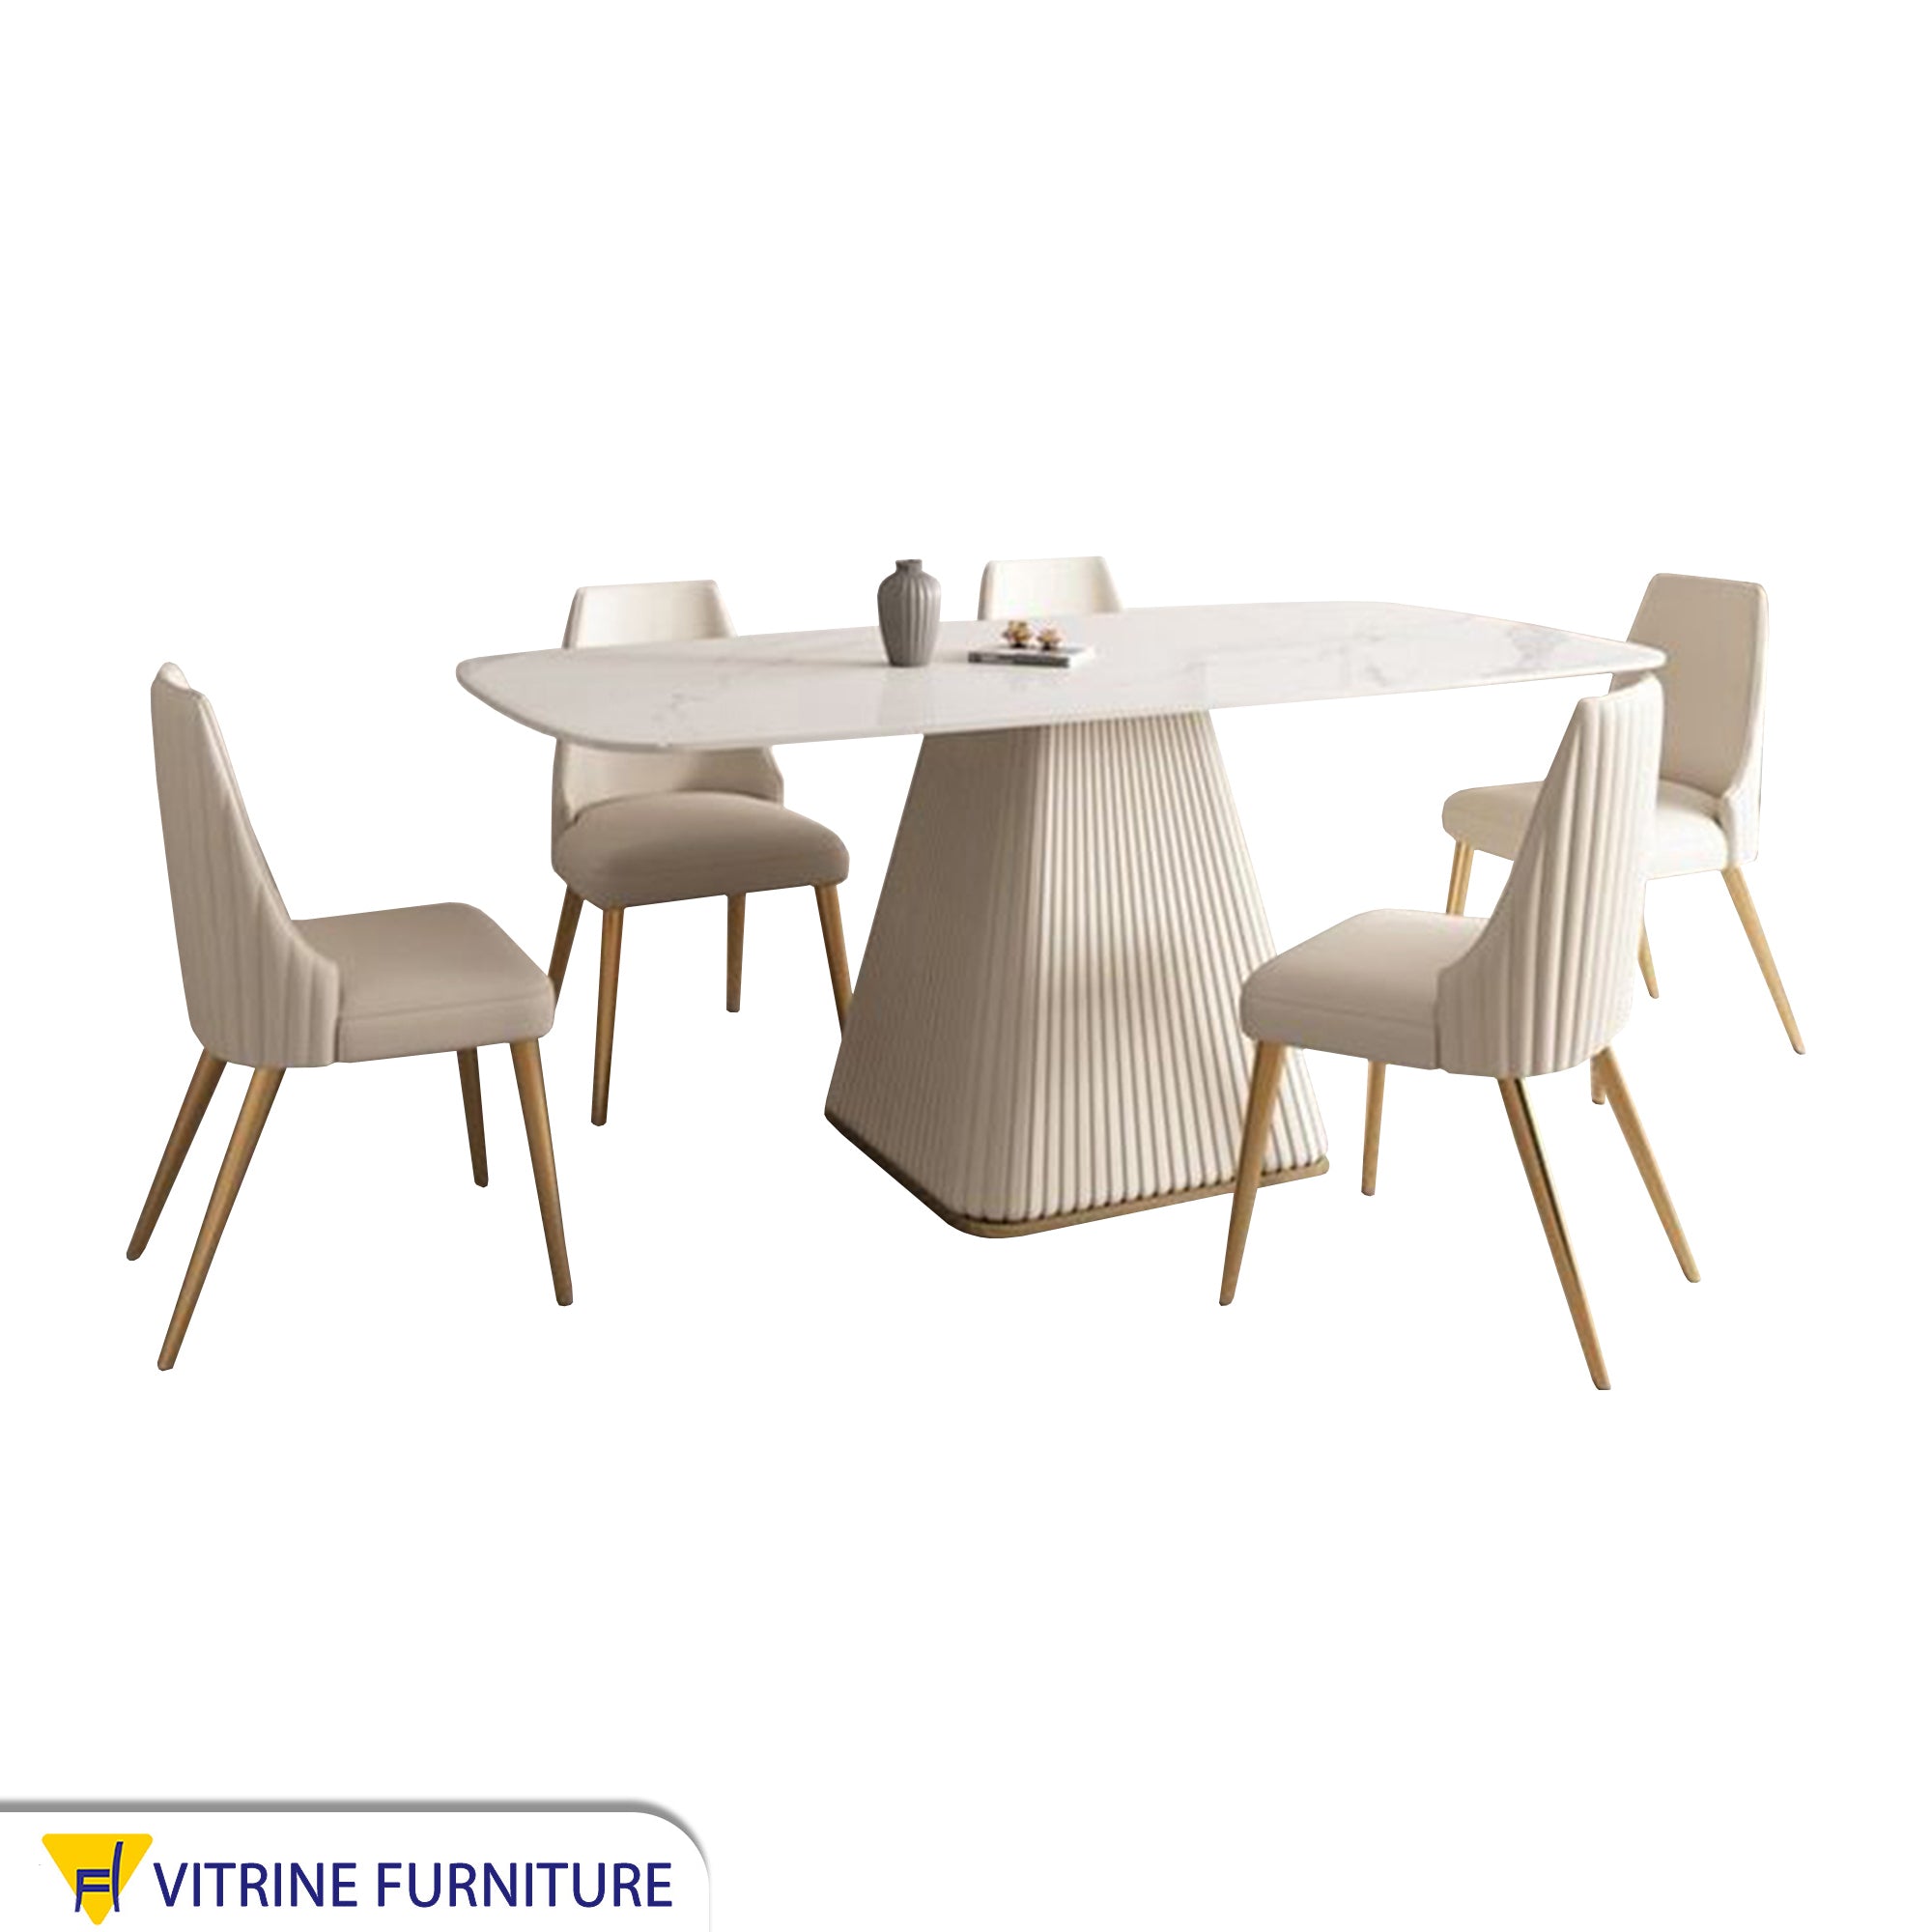 A cream-colored dining table with a unique and elegant design